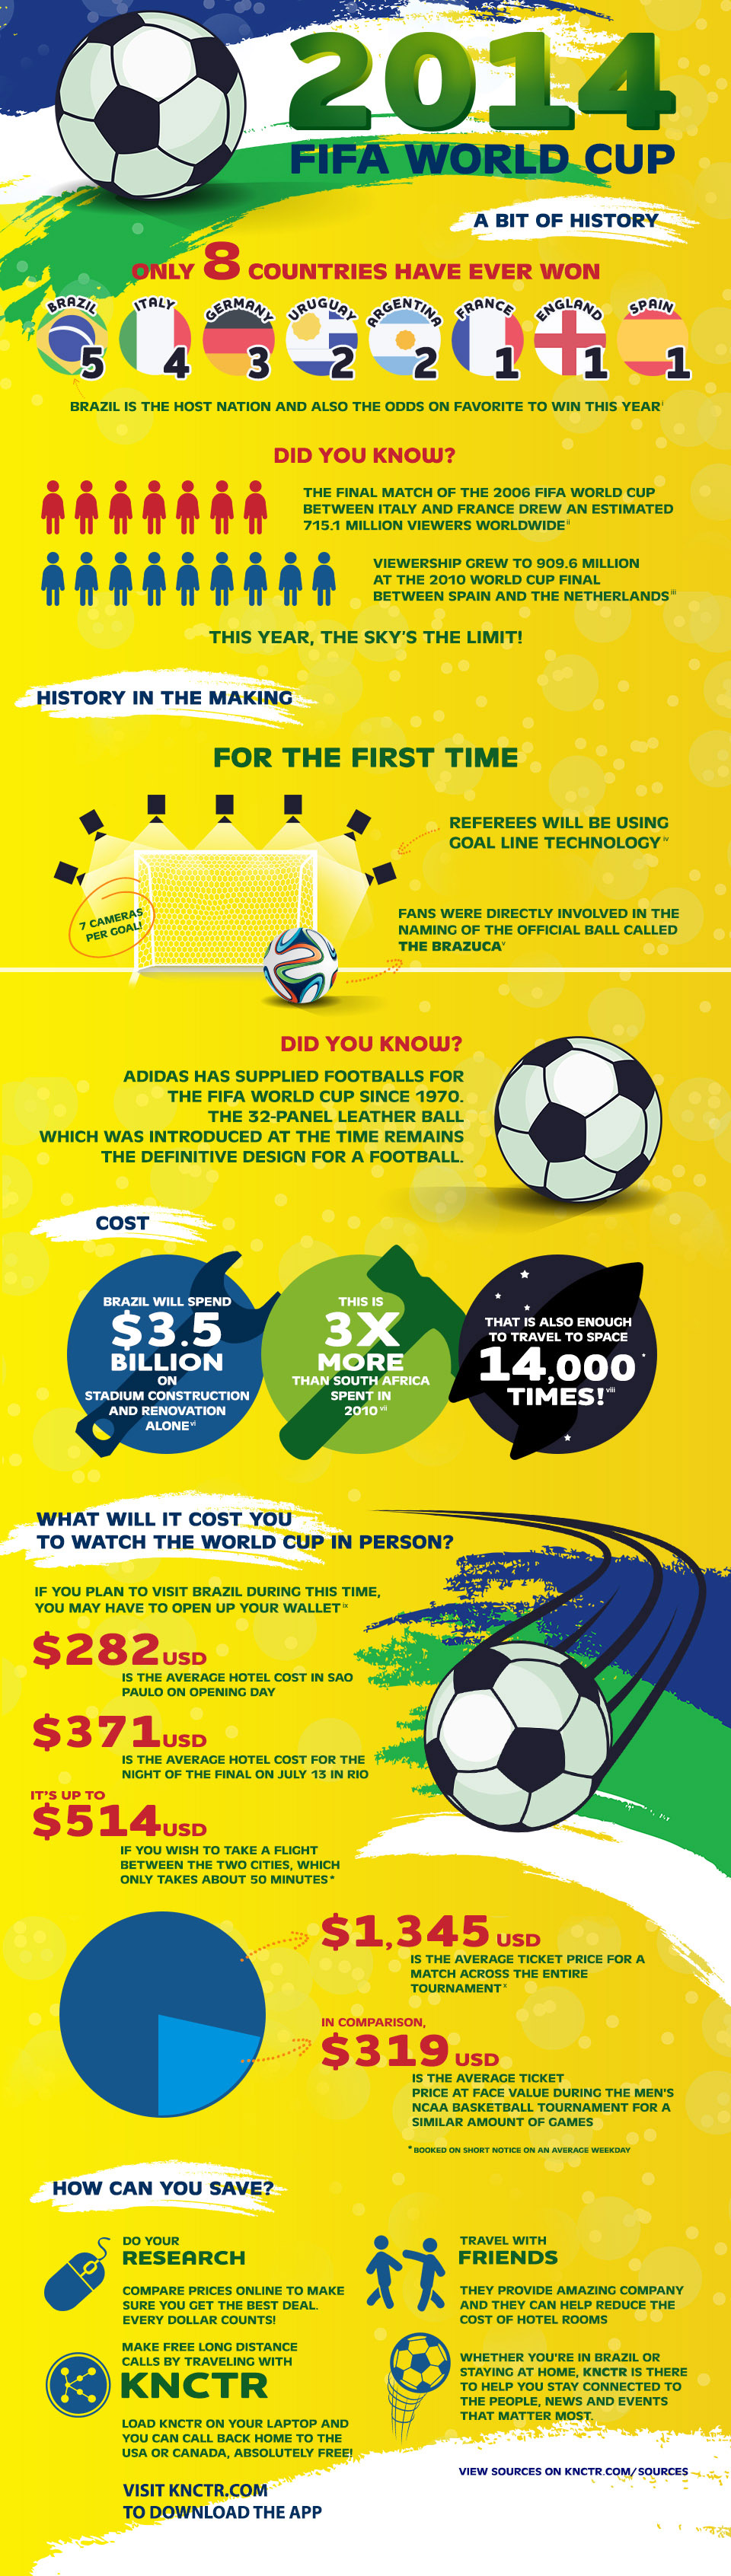 2014 FIFA World Cup – What You Need to Know